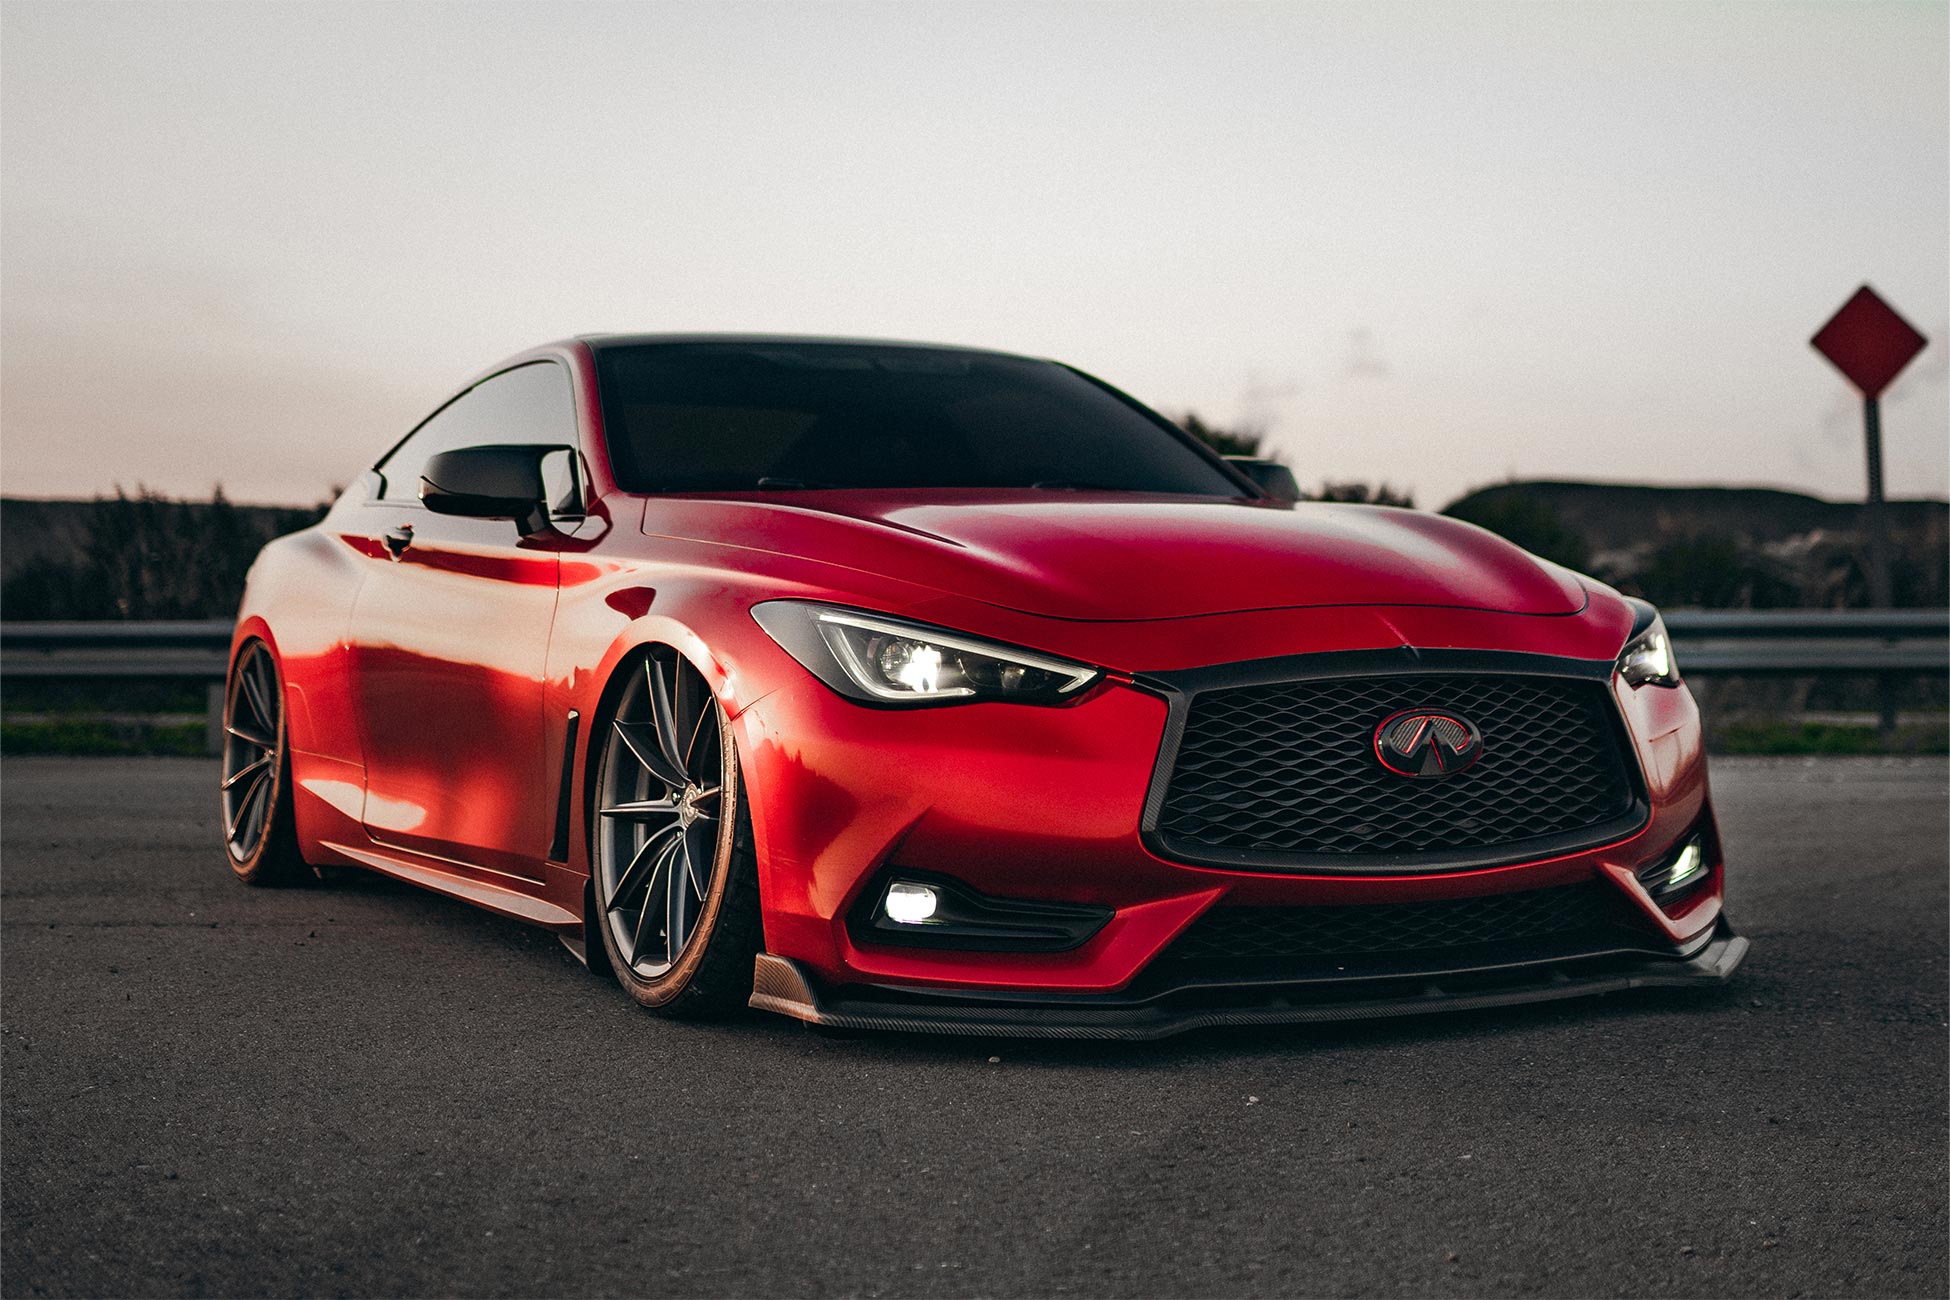 Bagged Q60 on staggered 20" C46's